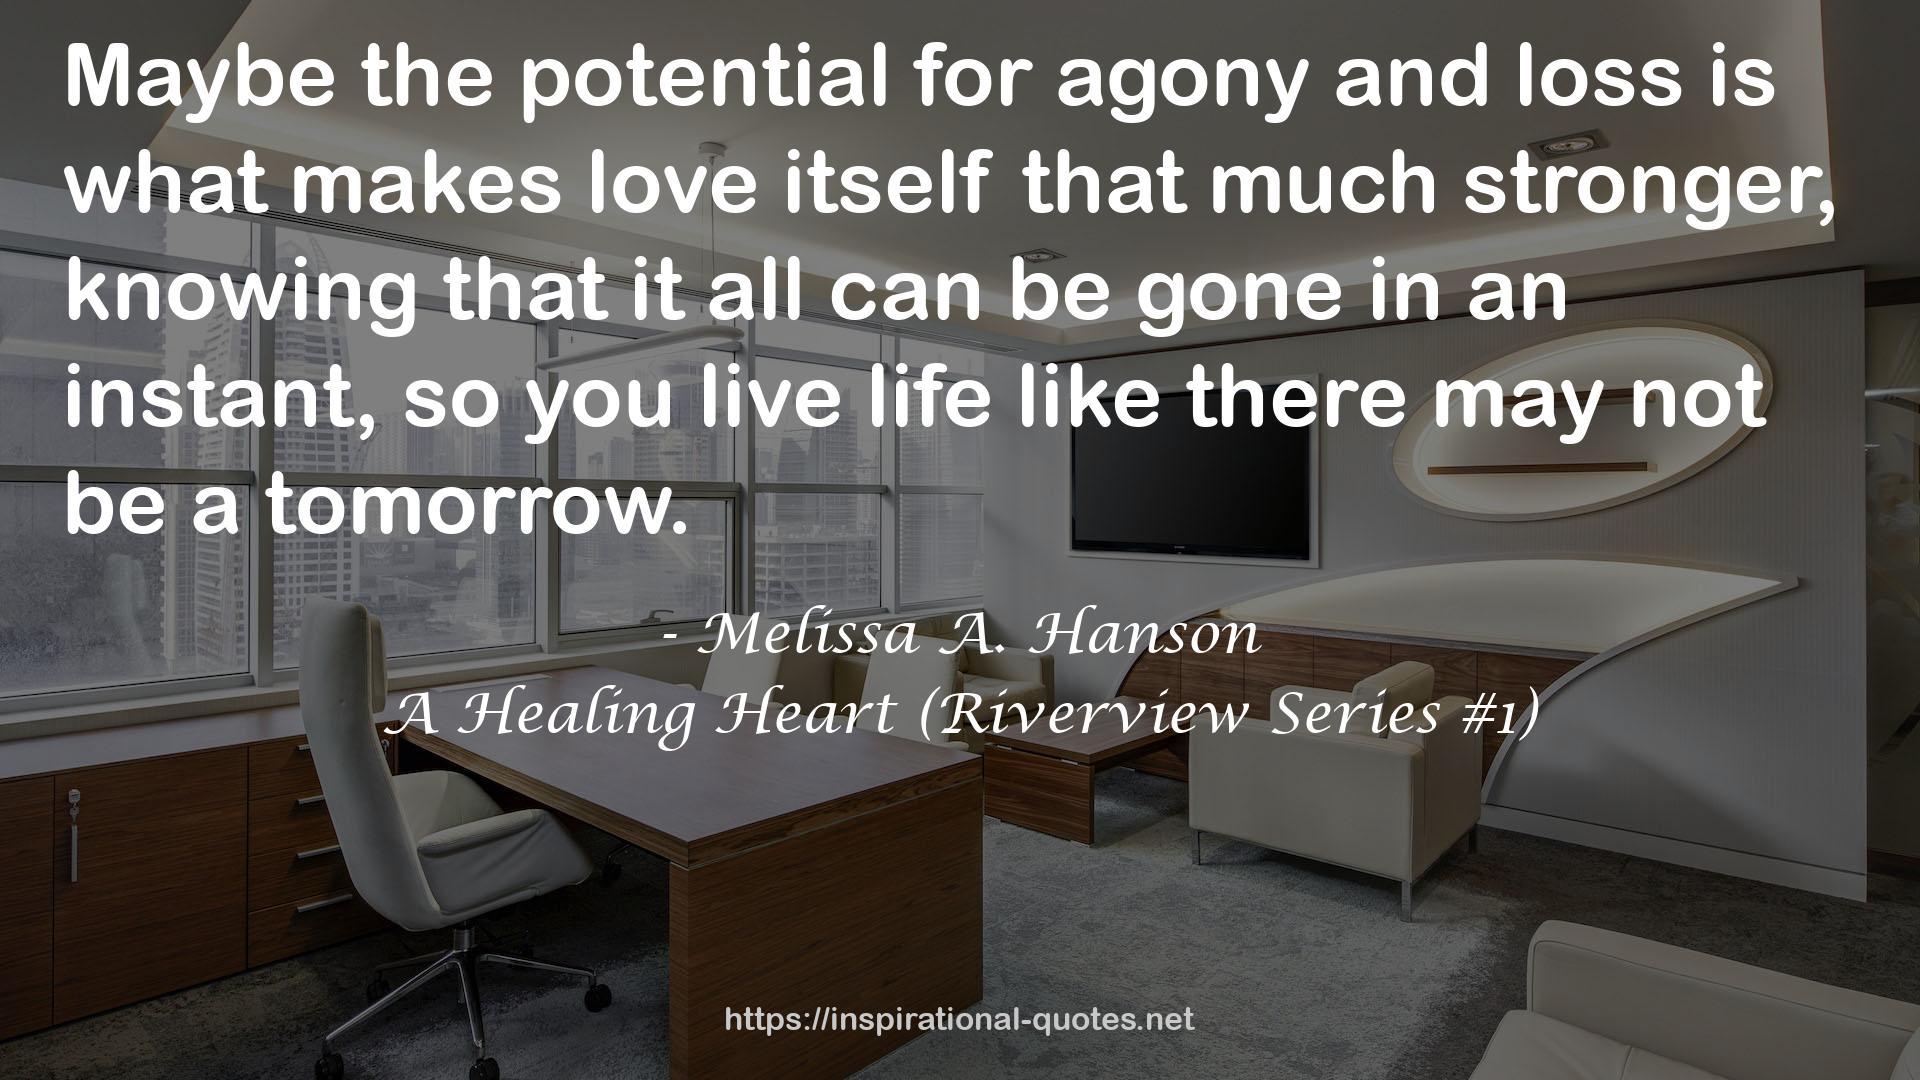 A Healing Heart (Riverview Series #1) QUOTES